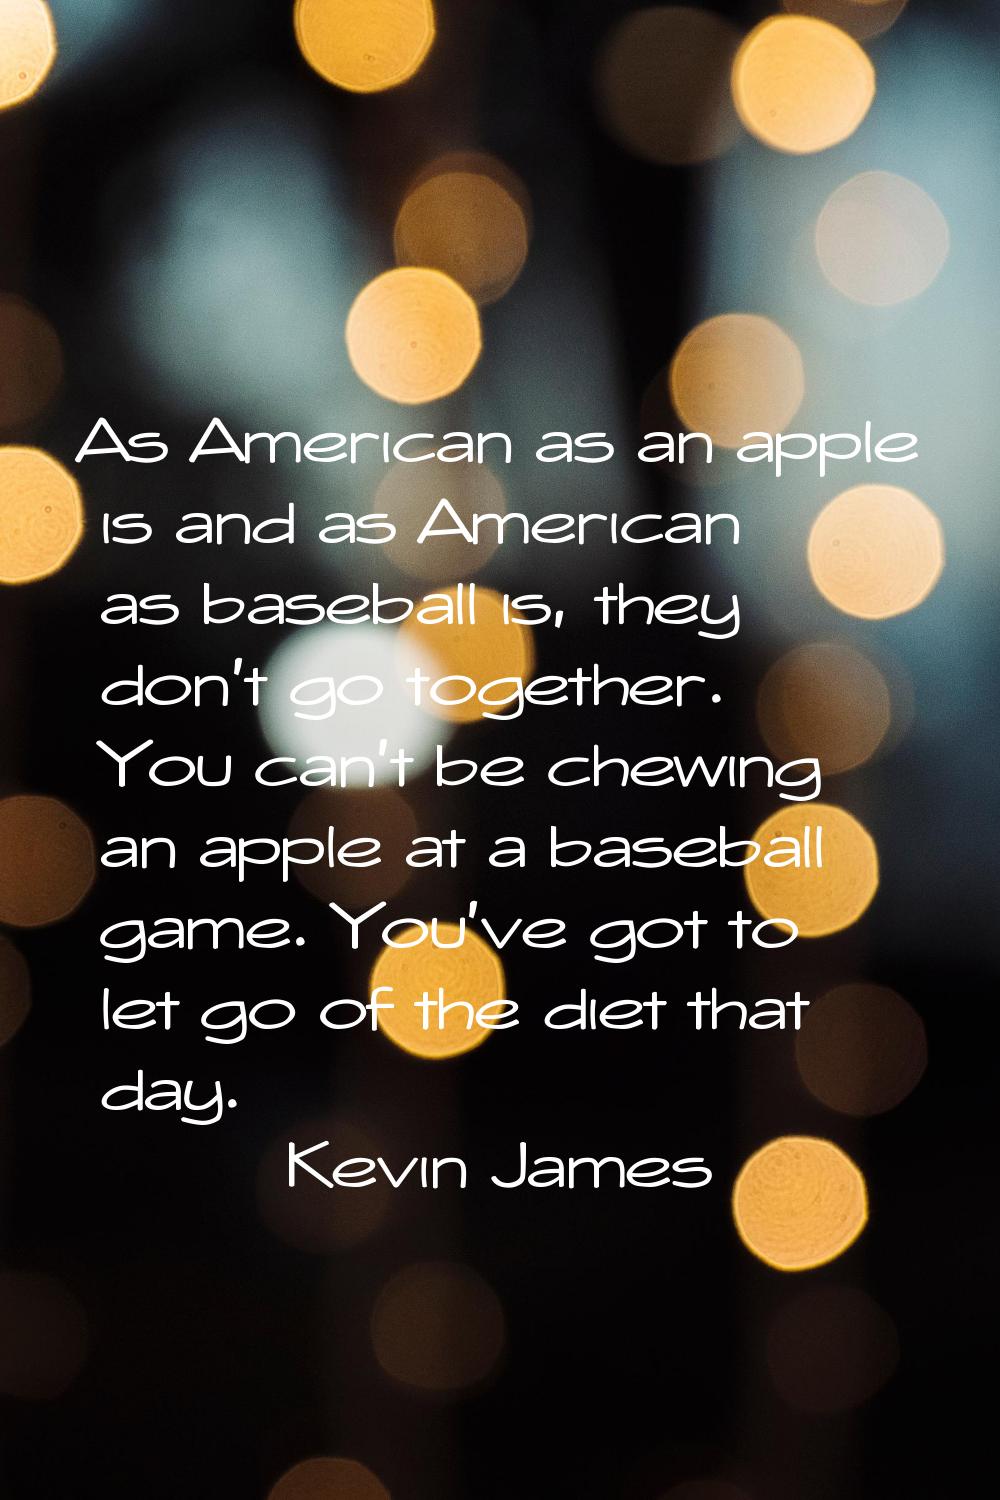 As American as an apple is and as American as baseball is, they don't go together. You can't be che